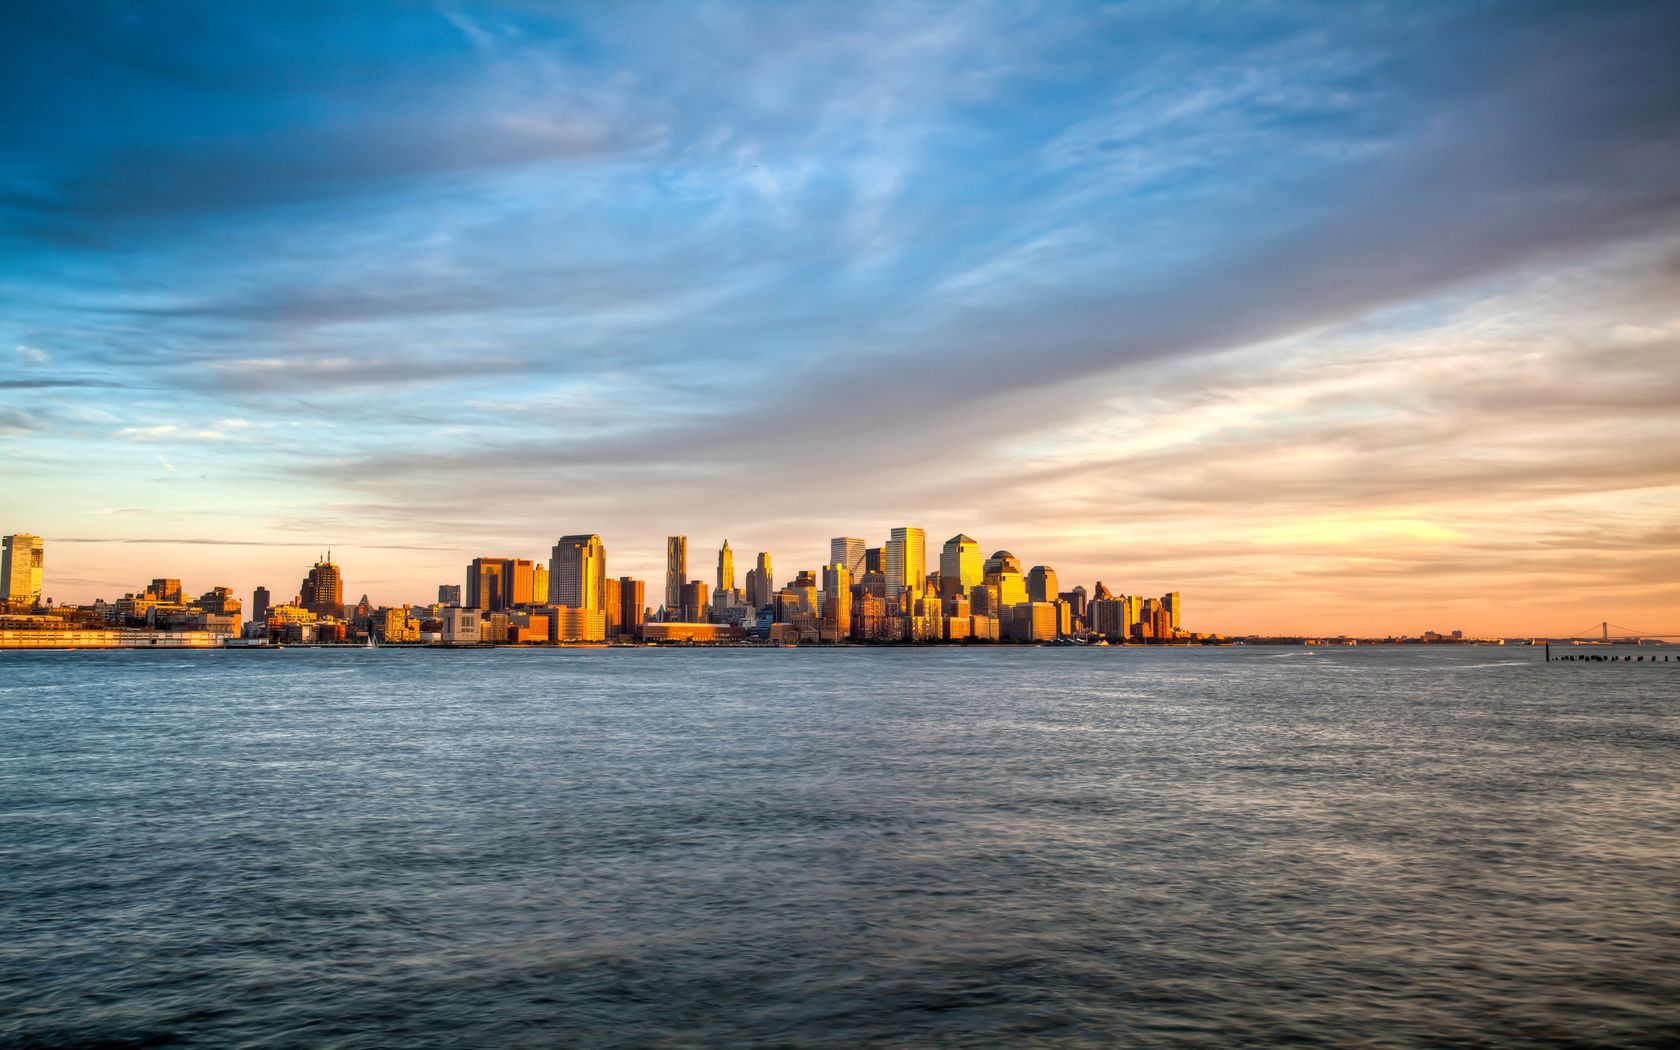 landscape, cities, water, sunset, sky, sea, clouds, waves, overview, review, evening, view, island, new york, manhattan 32K